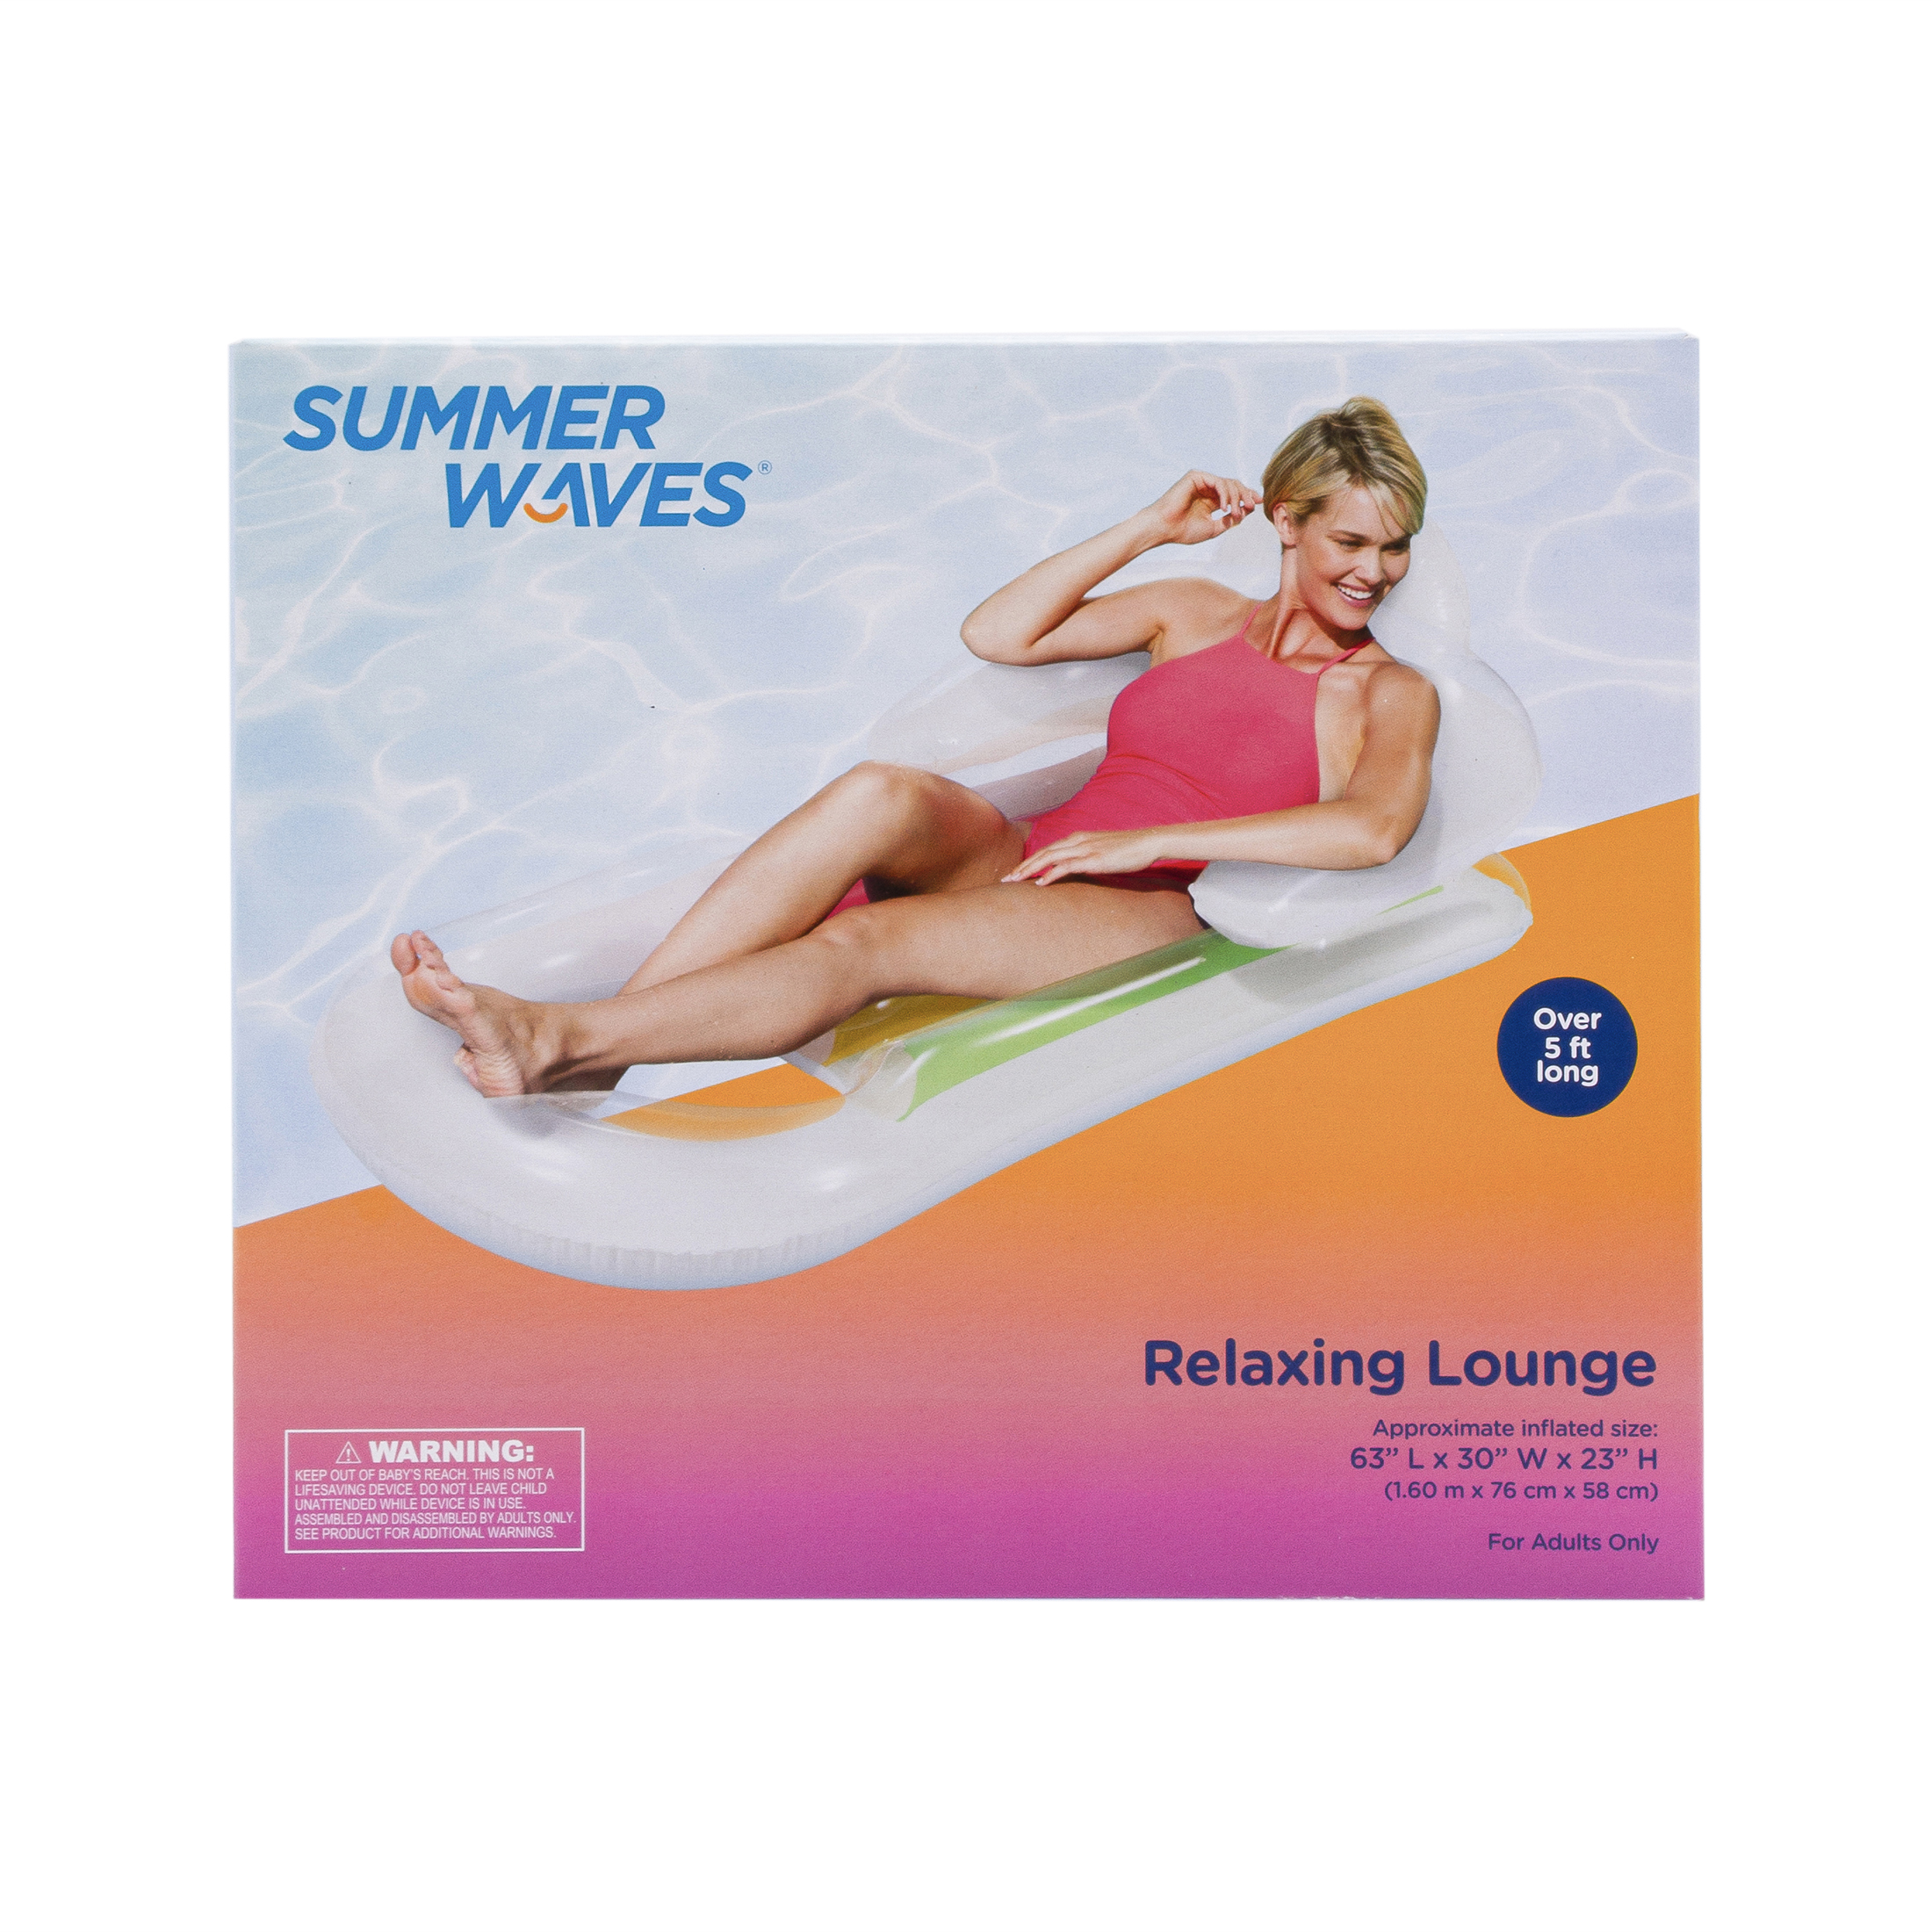 Inflatable Relaxing Lounge Pool Float, White, for Adults, Unisex - image 5 of 6